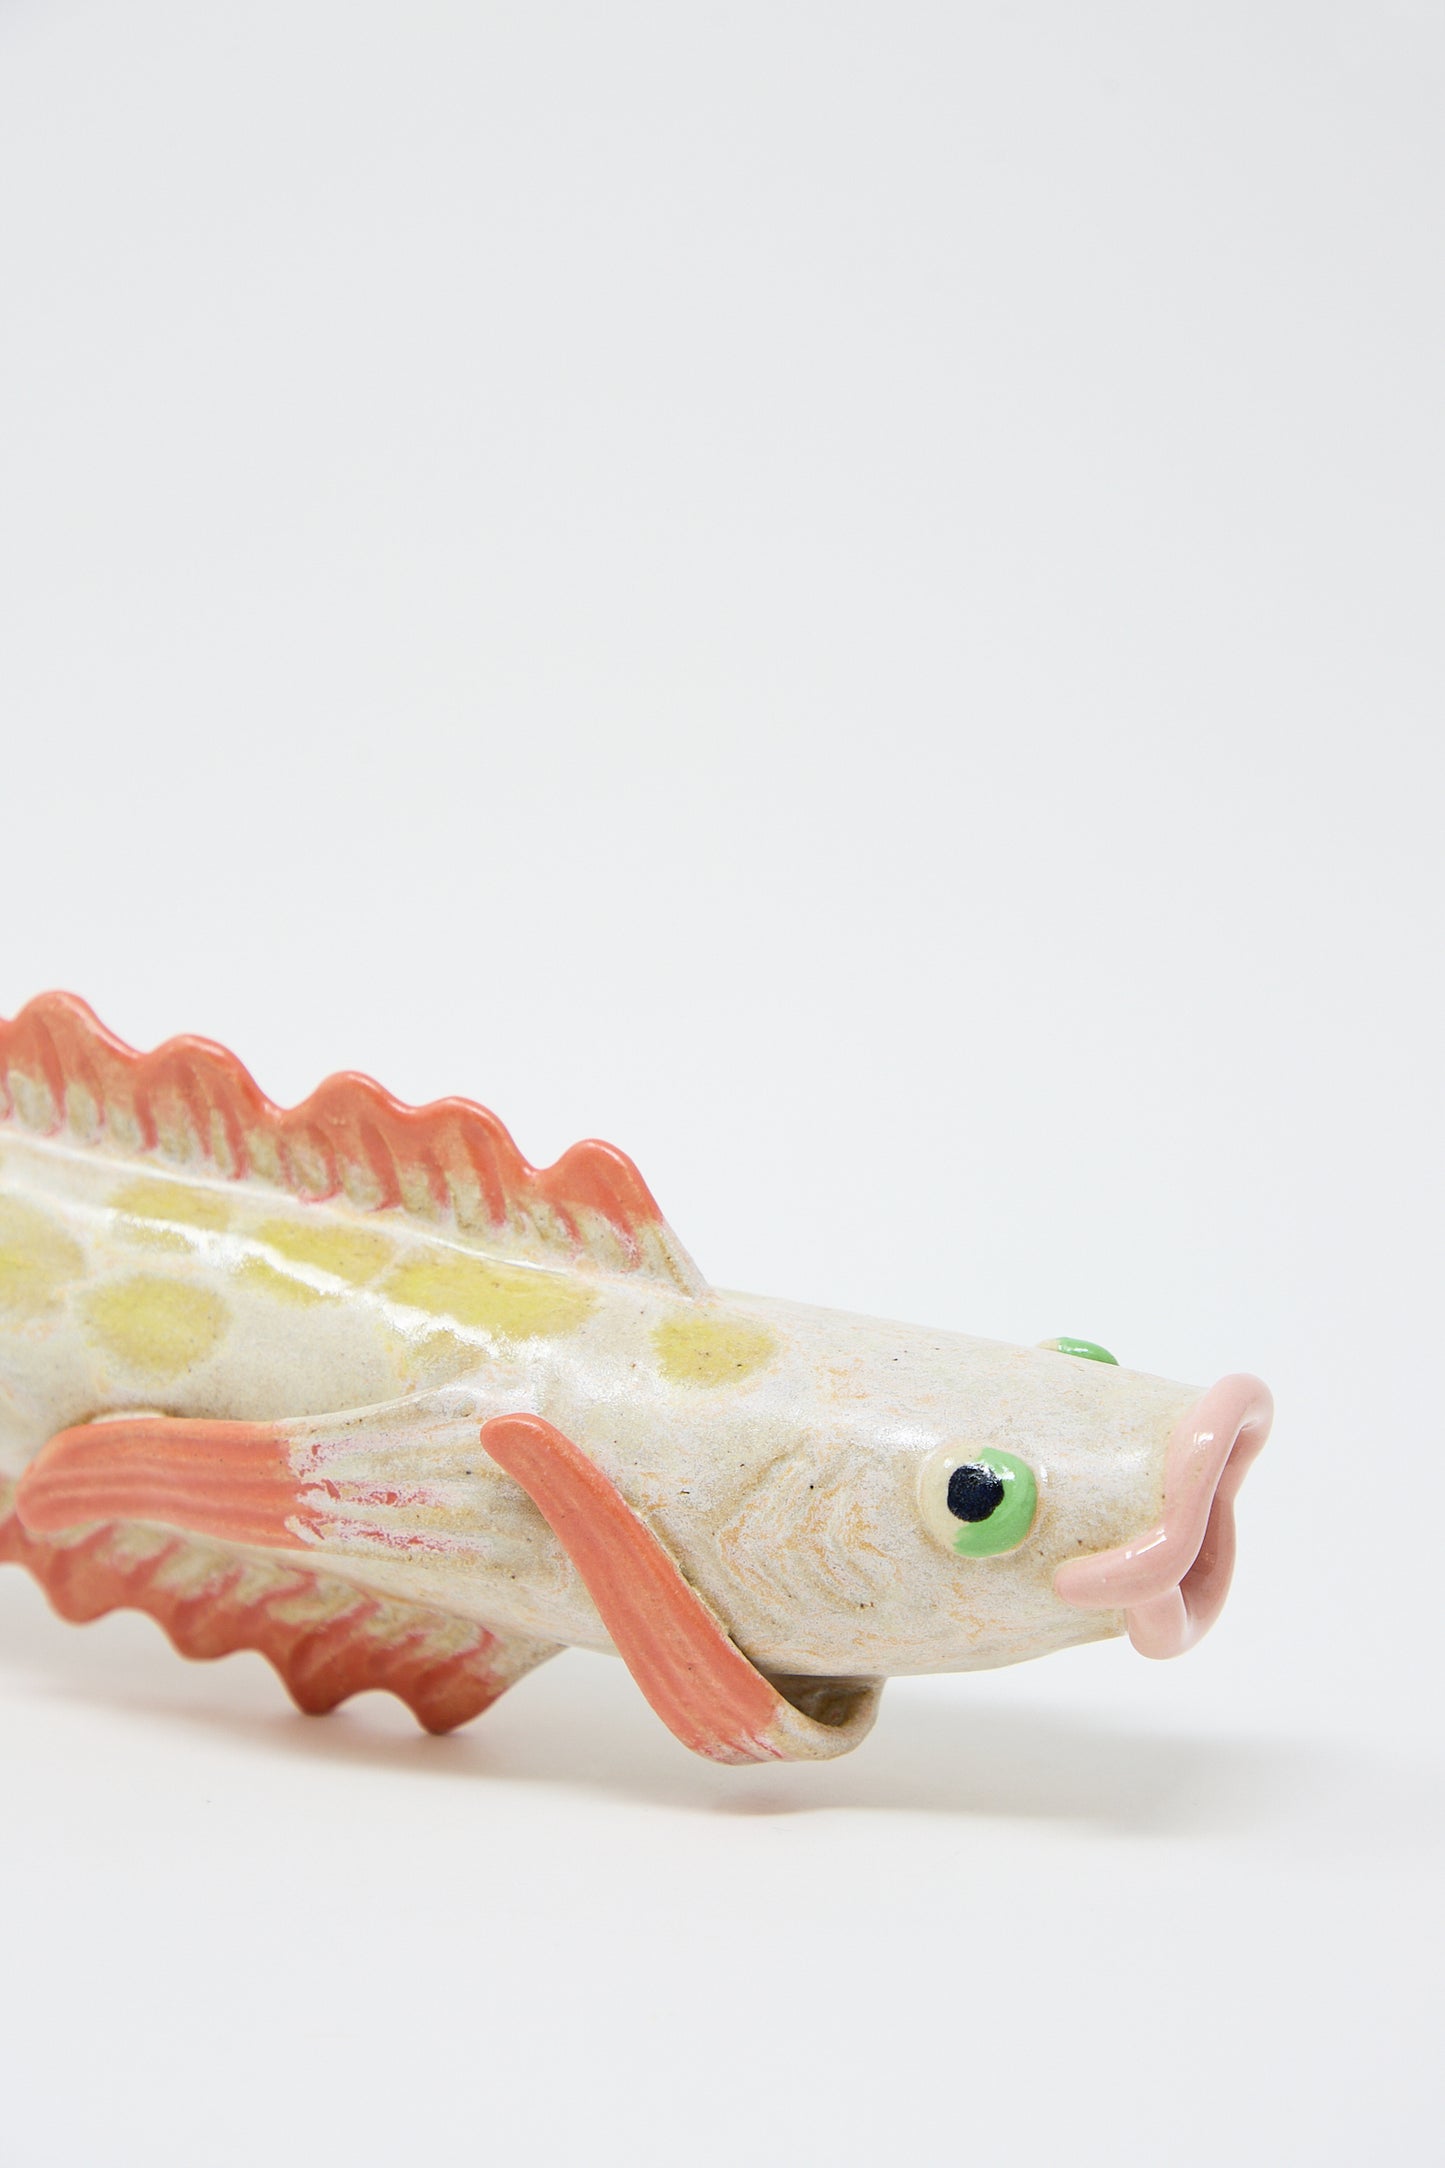 Pearce Williams Ceramic Fish Vase in Pink, with a colorful glazed finish, featuring pink fins and green eyes, isolated on a white background.